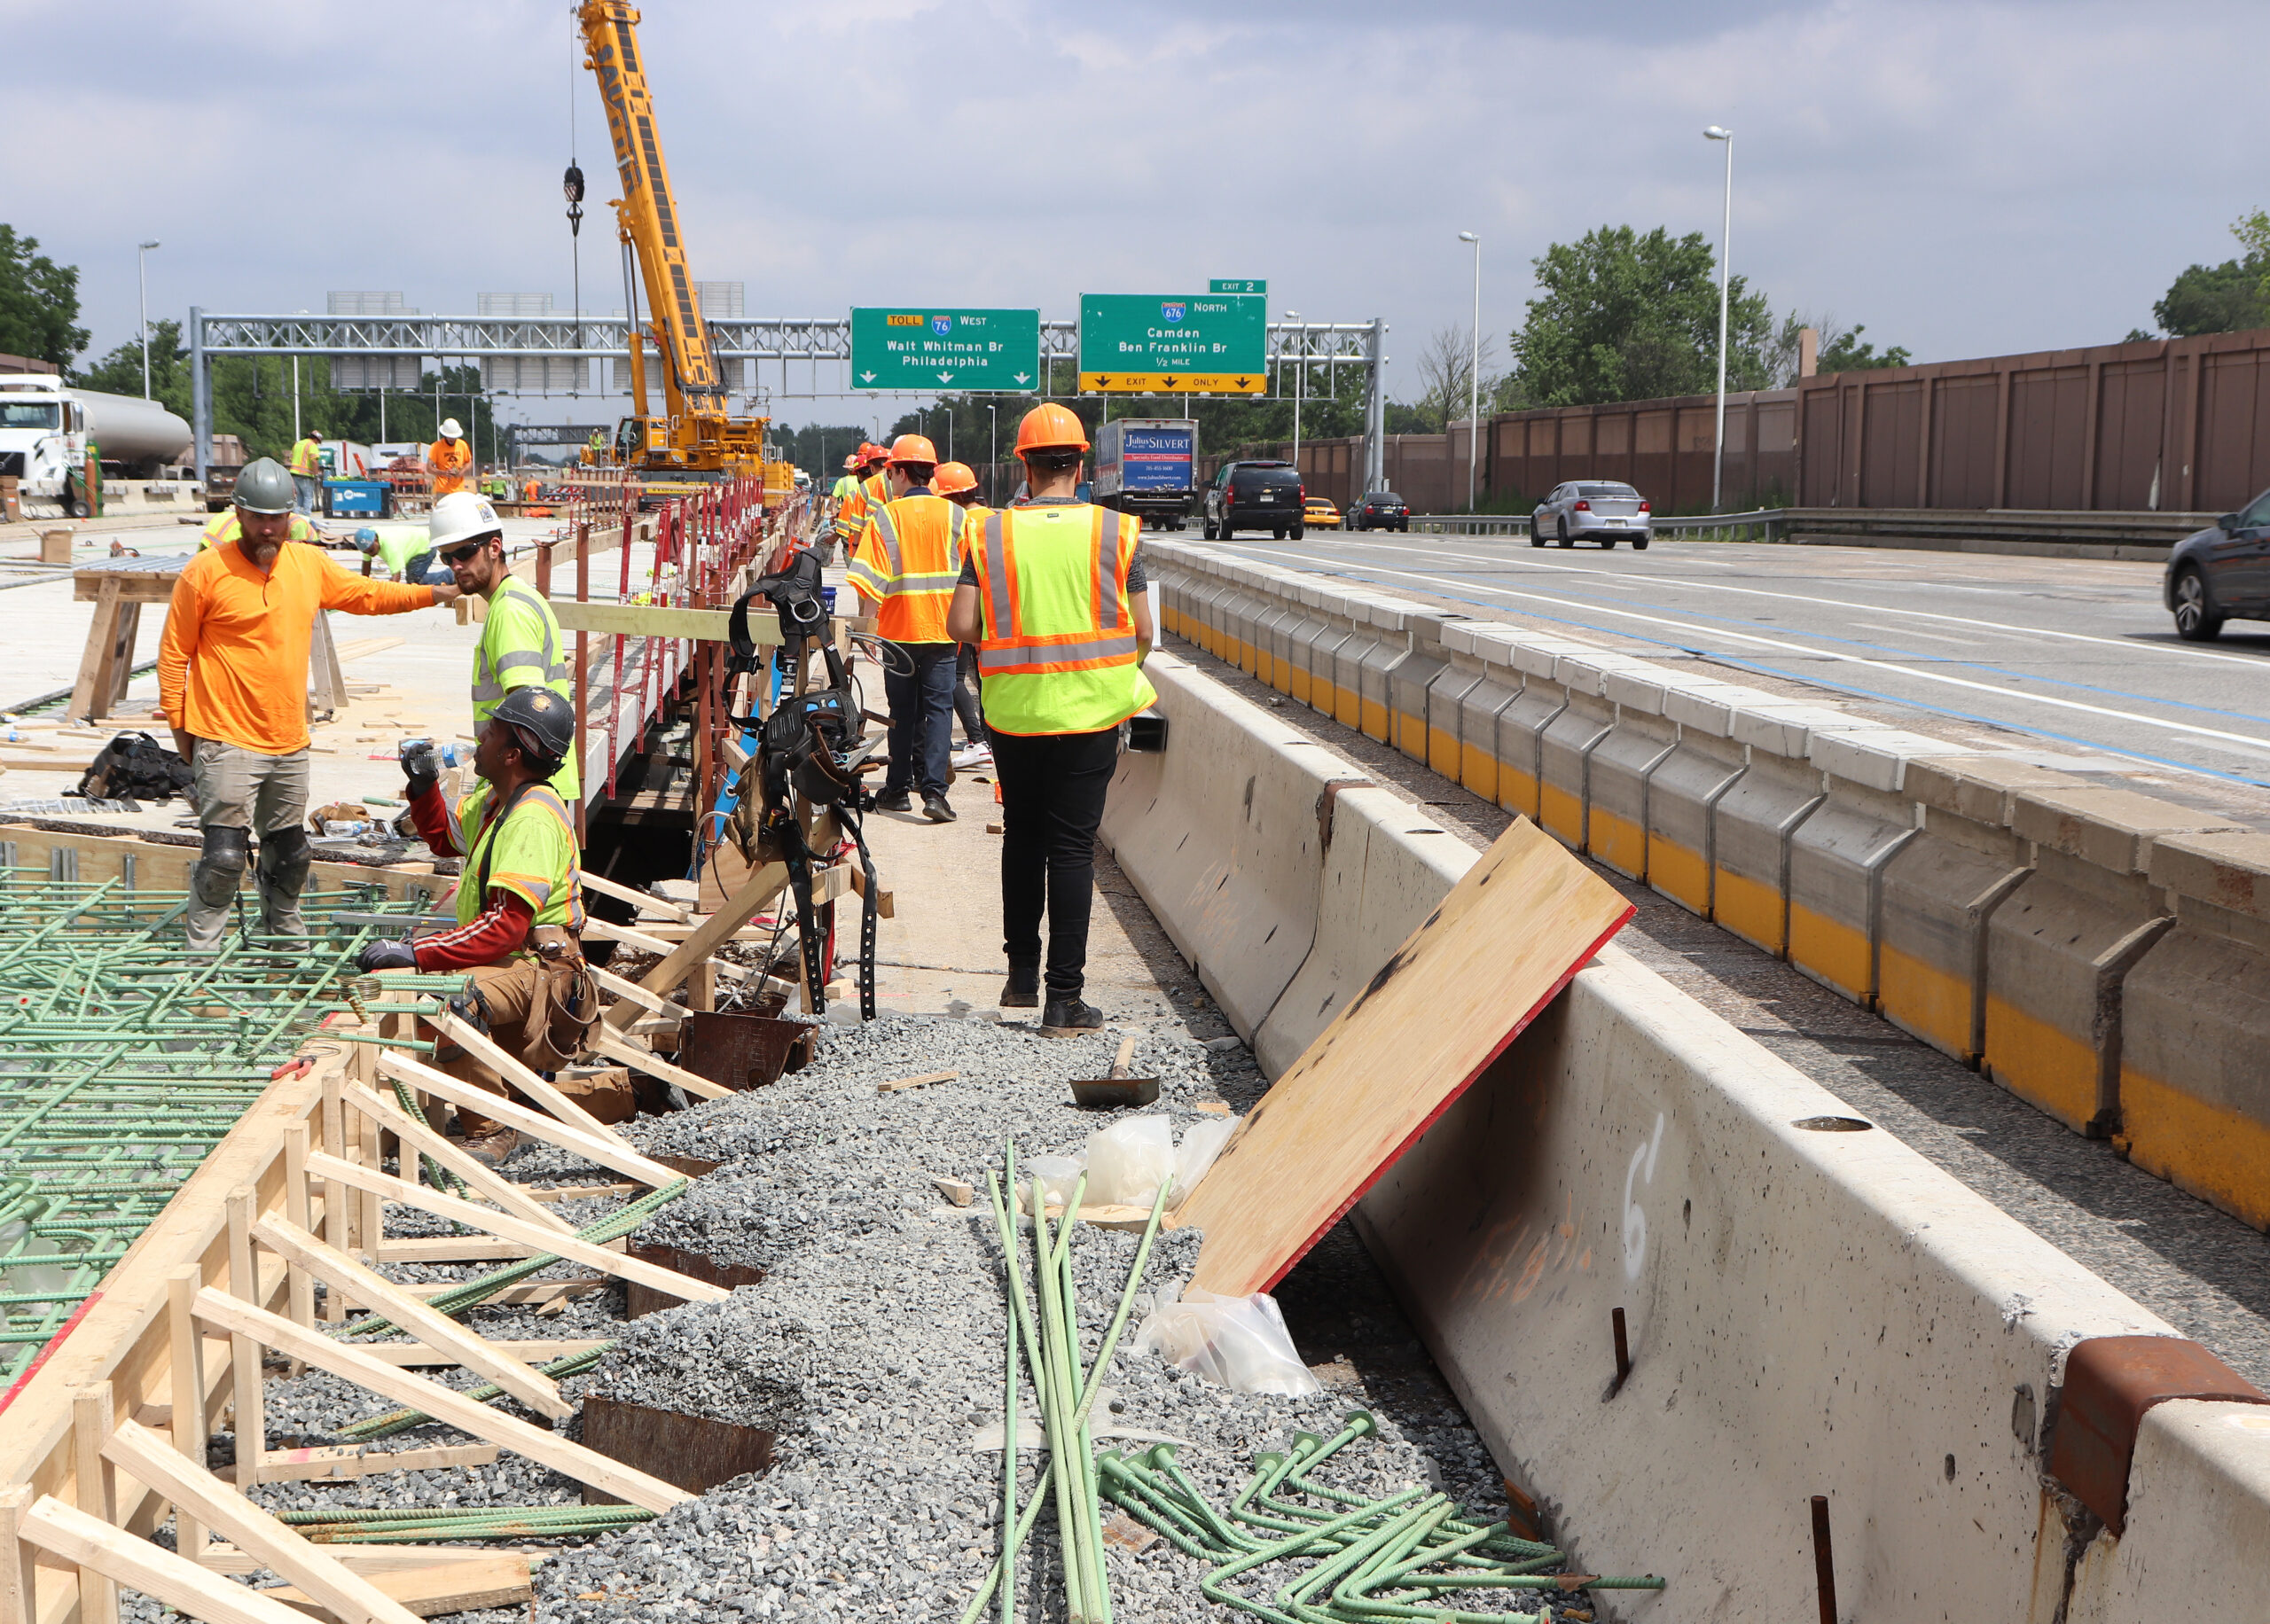 We have to change driver behavior in work zones – it is costing highway workers their lives